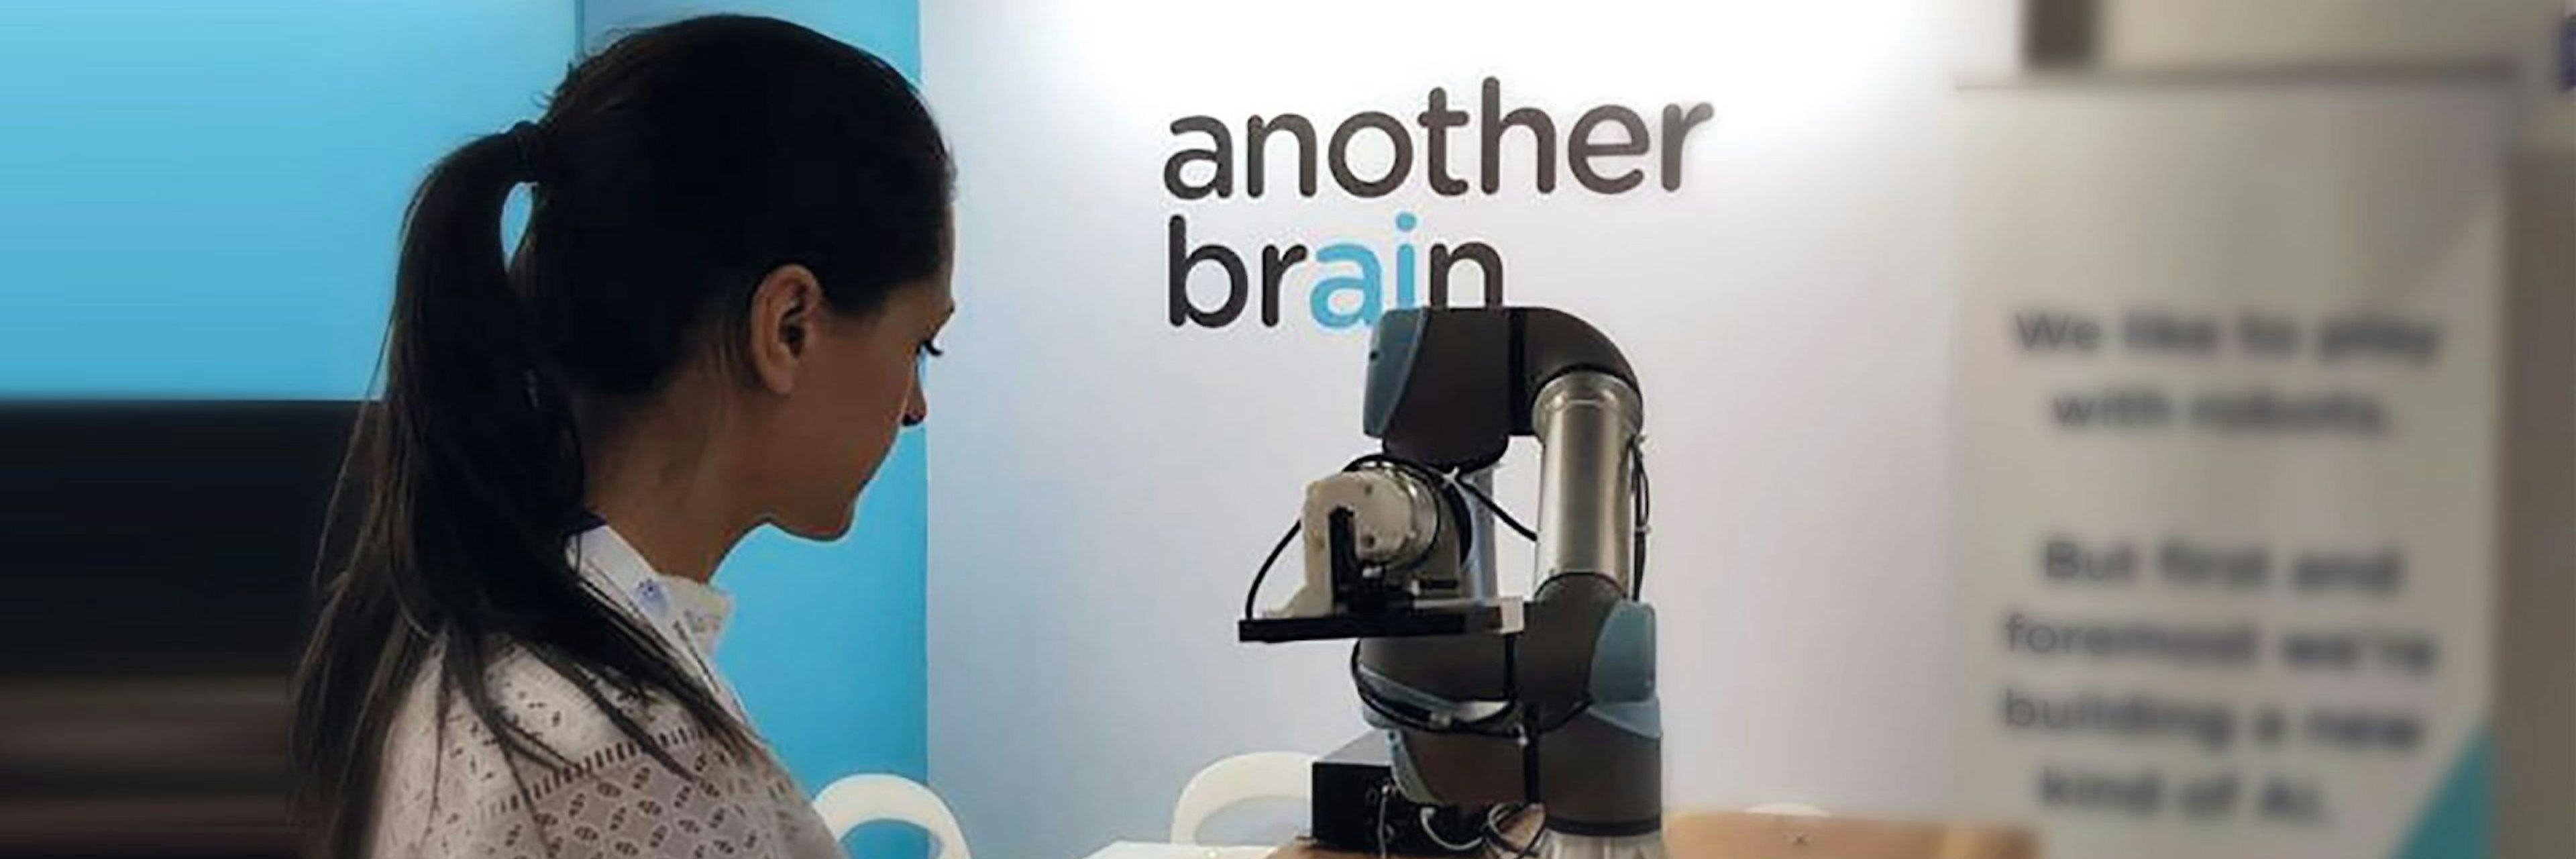 picture of woman using an AnotherBrain device